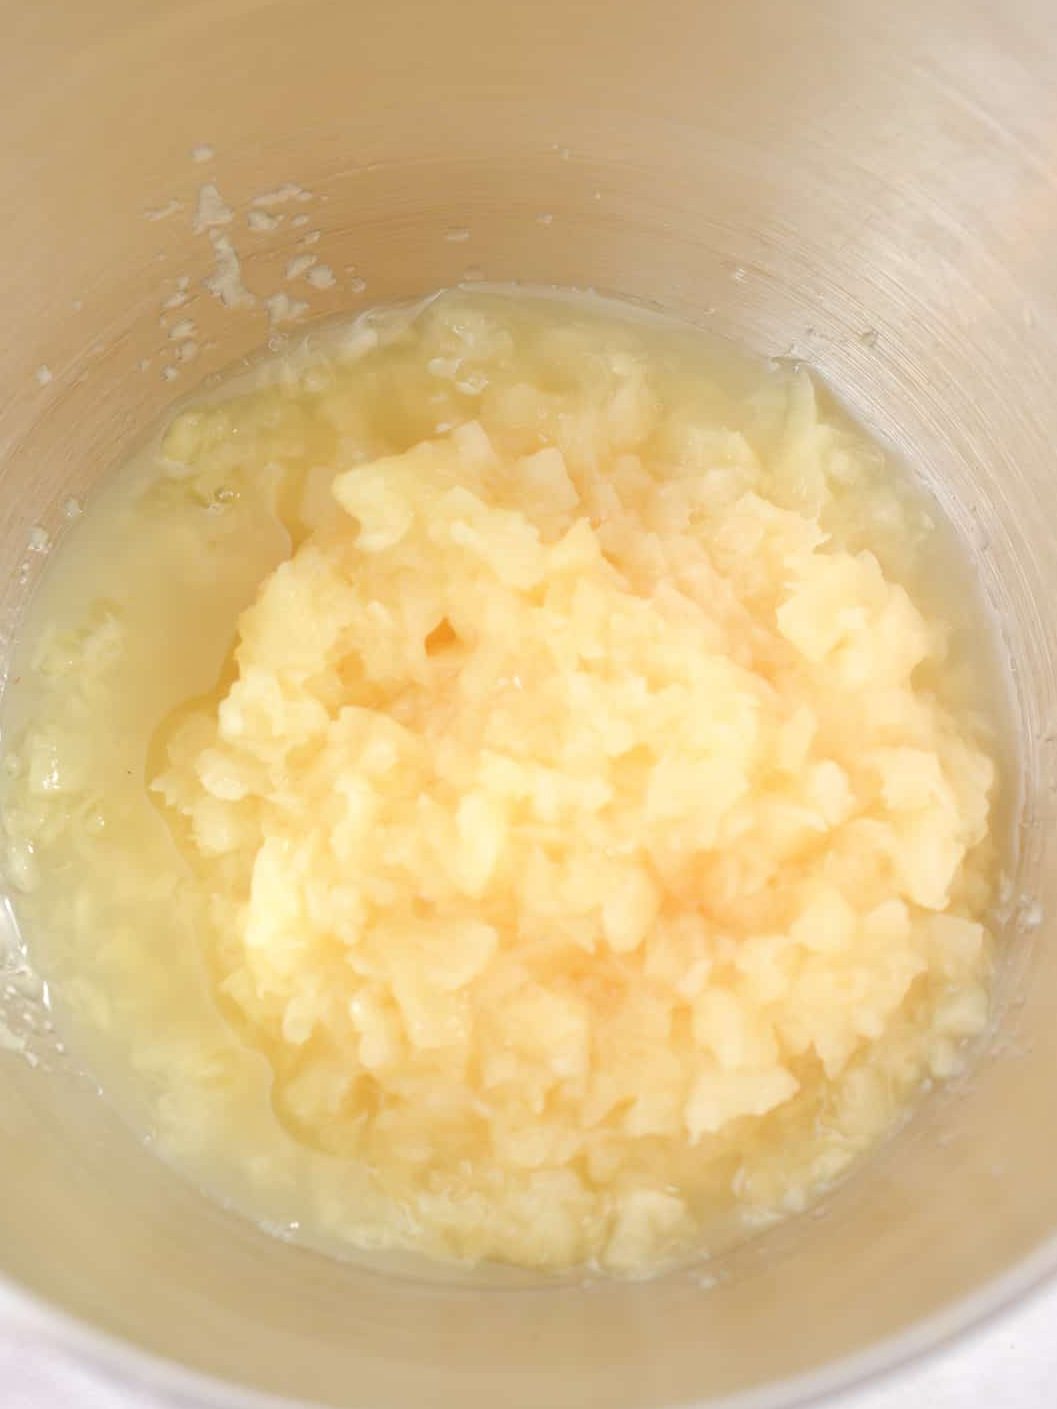 In a mixing bowl, add 1 can of crushed pineapple.